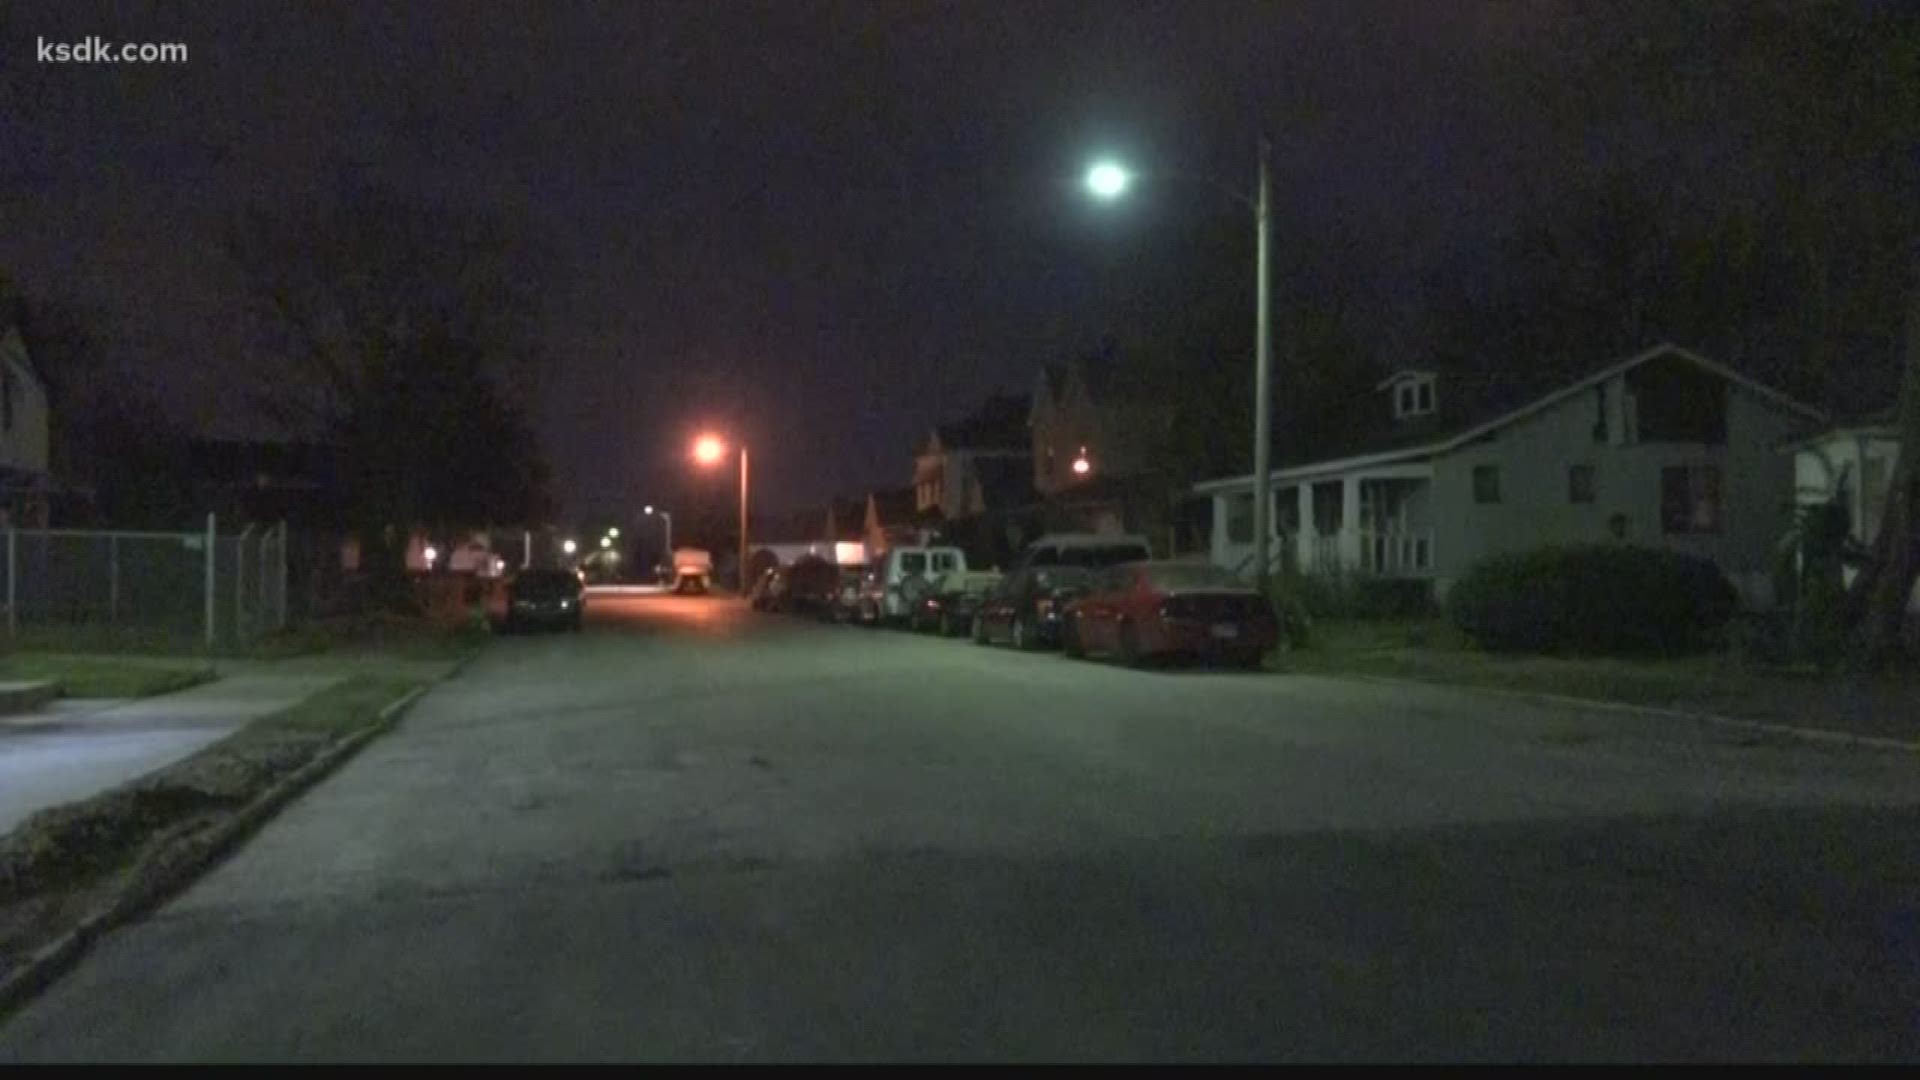 An investigation is underway after a man was shot in East St. Louis early Tuesday morning.